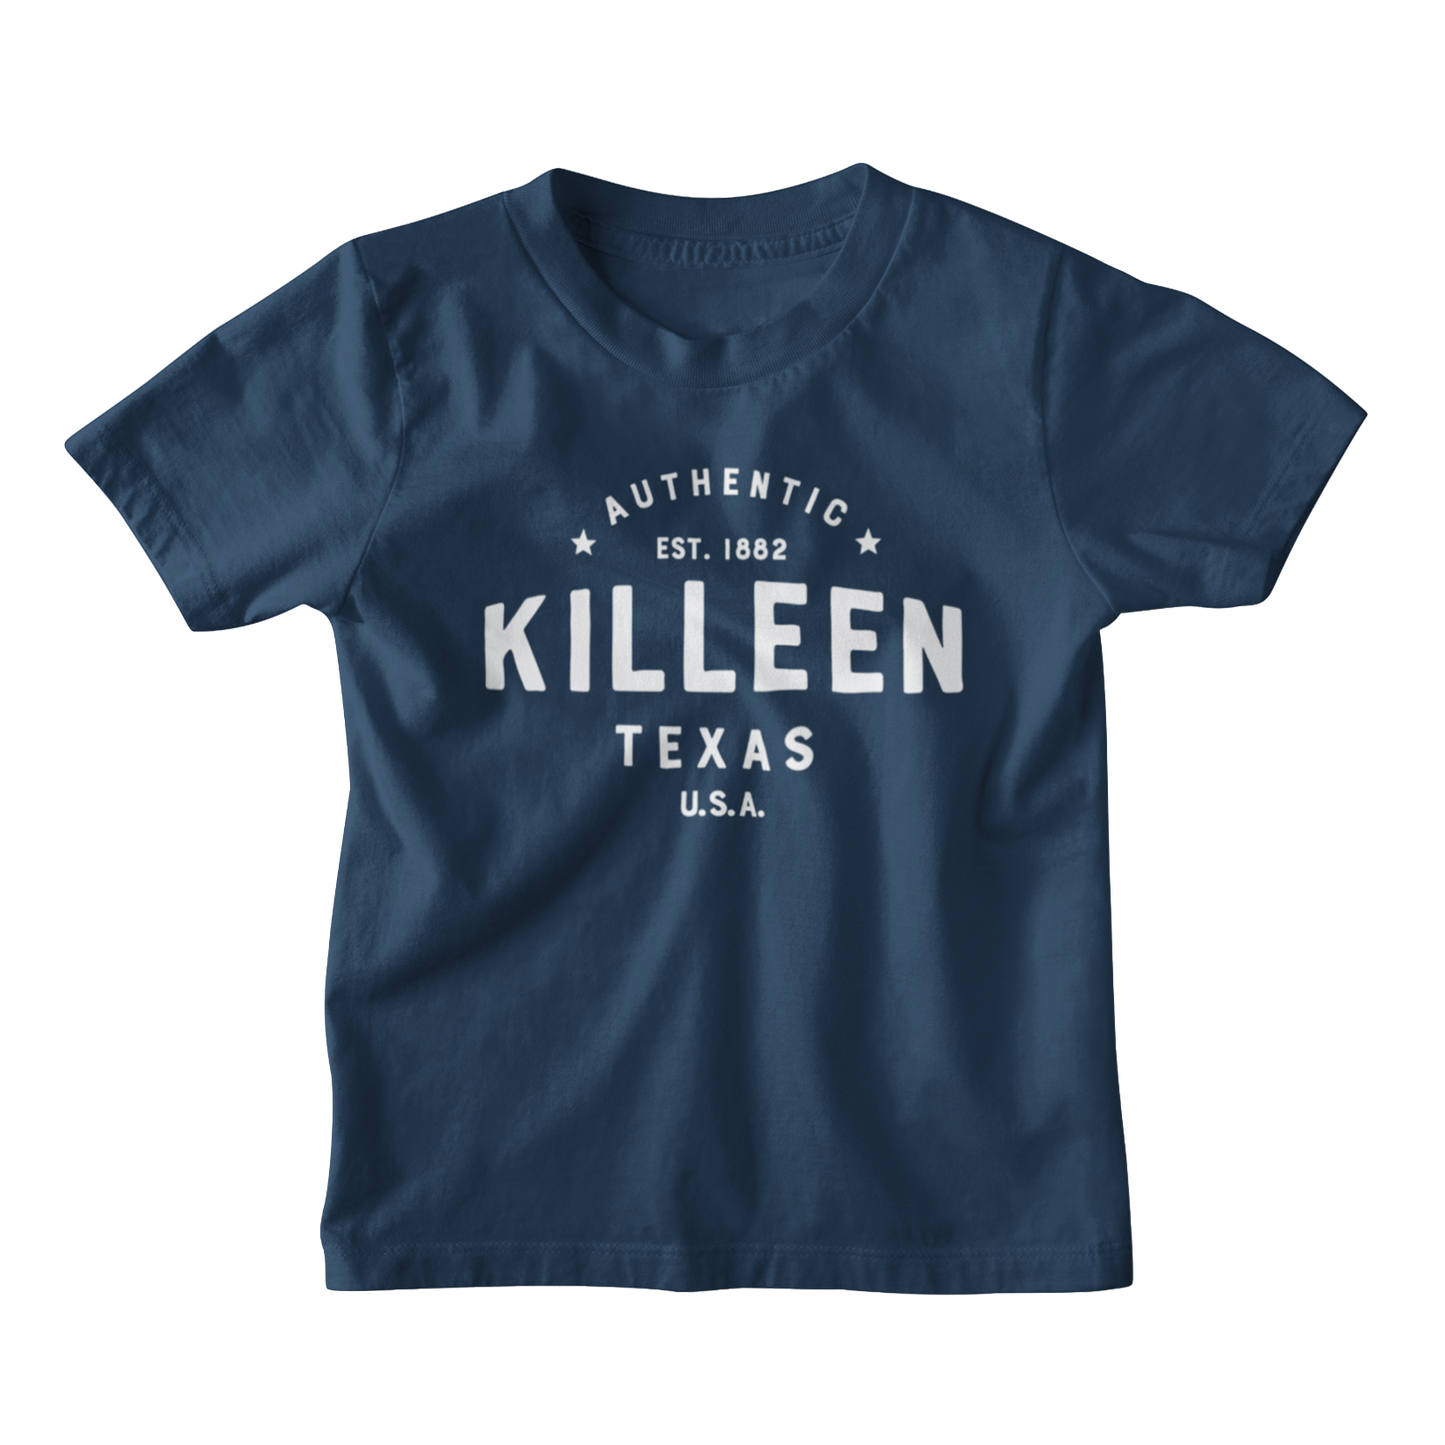 Killeen Texas Youth T-shirt - Authentic